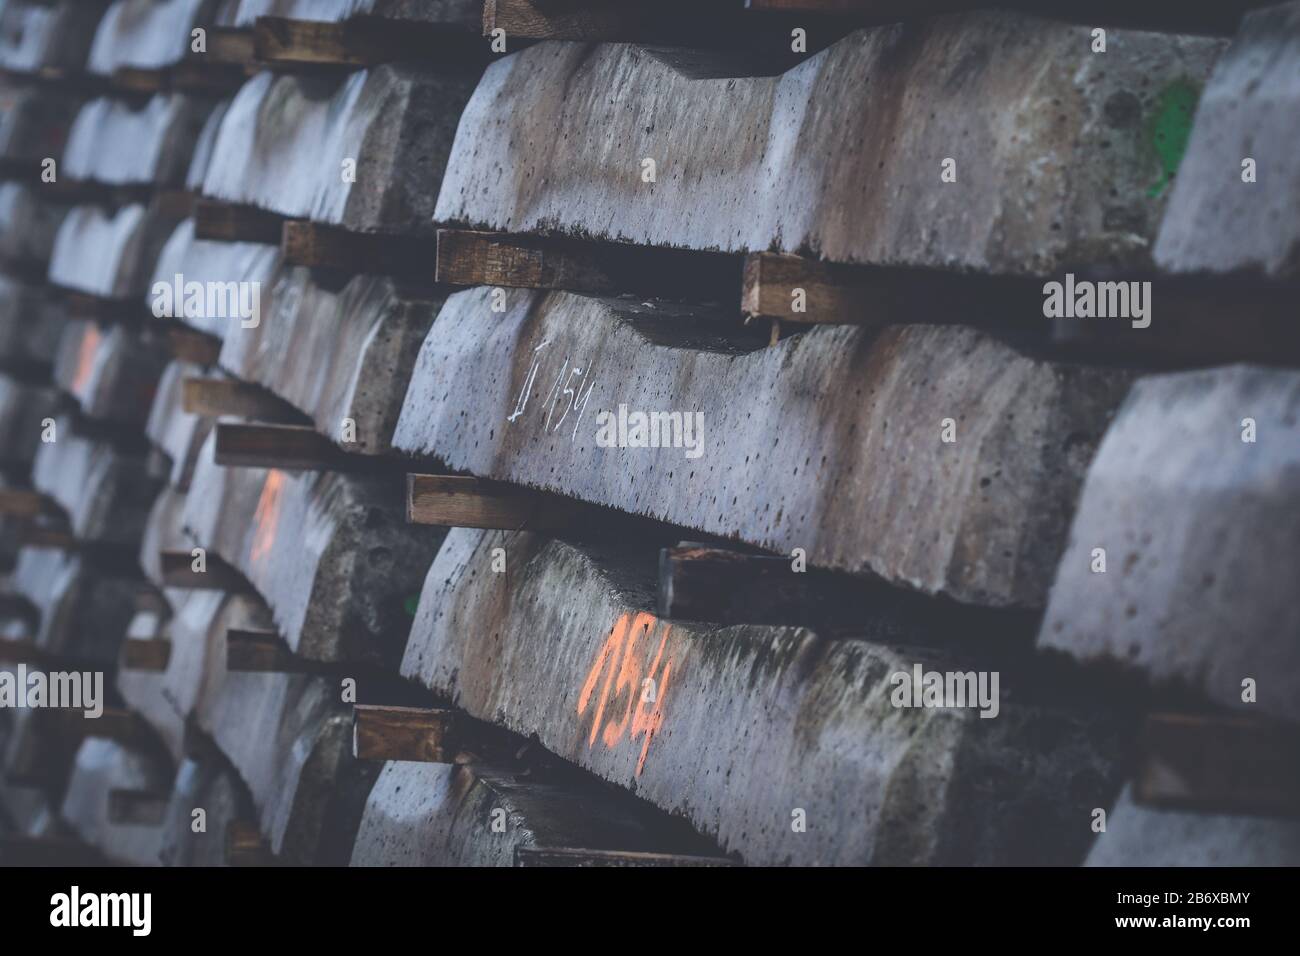 New concrete railway sleepers stacked up in a rows ready to lie under railway track Stock Photo